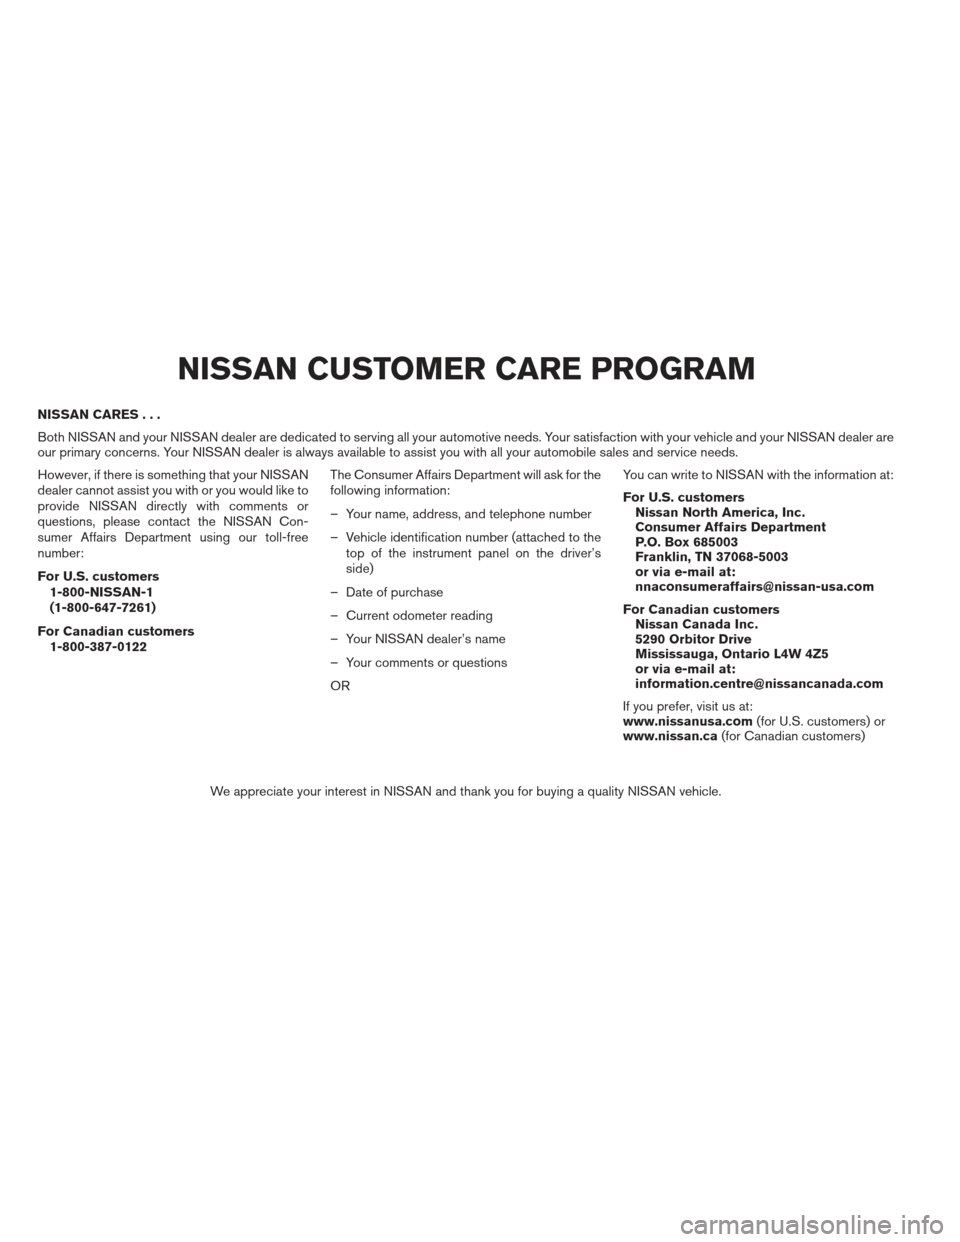 NISSAN FRONTIER 2013 D40 / 2.G Owners Manual NISSAN CARES...
Both NISSAN and your NISSAN dealer are dedicated to serving all your automotive needs. Your satisfaction with your vehicle and your NISSAN dealer are
our primary concerns. Your NISSAN 